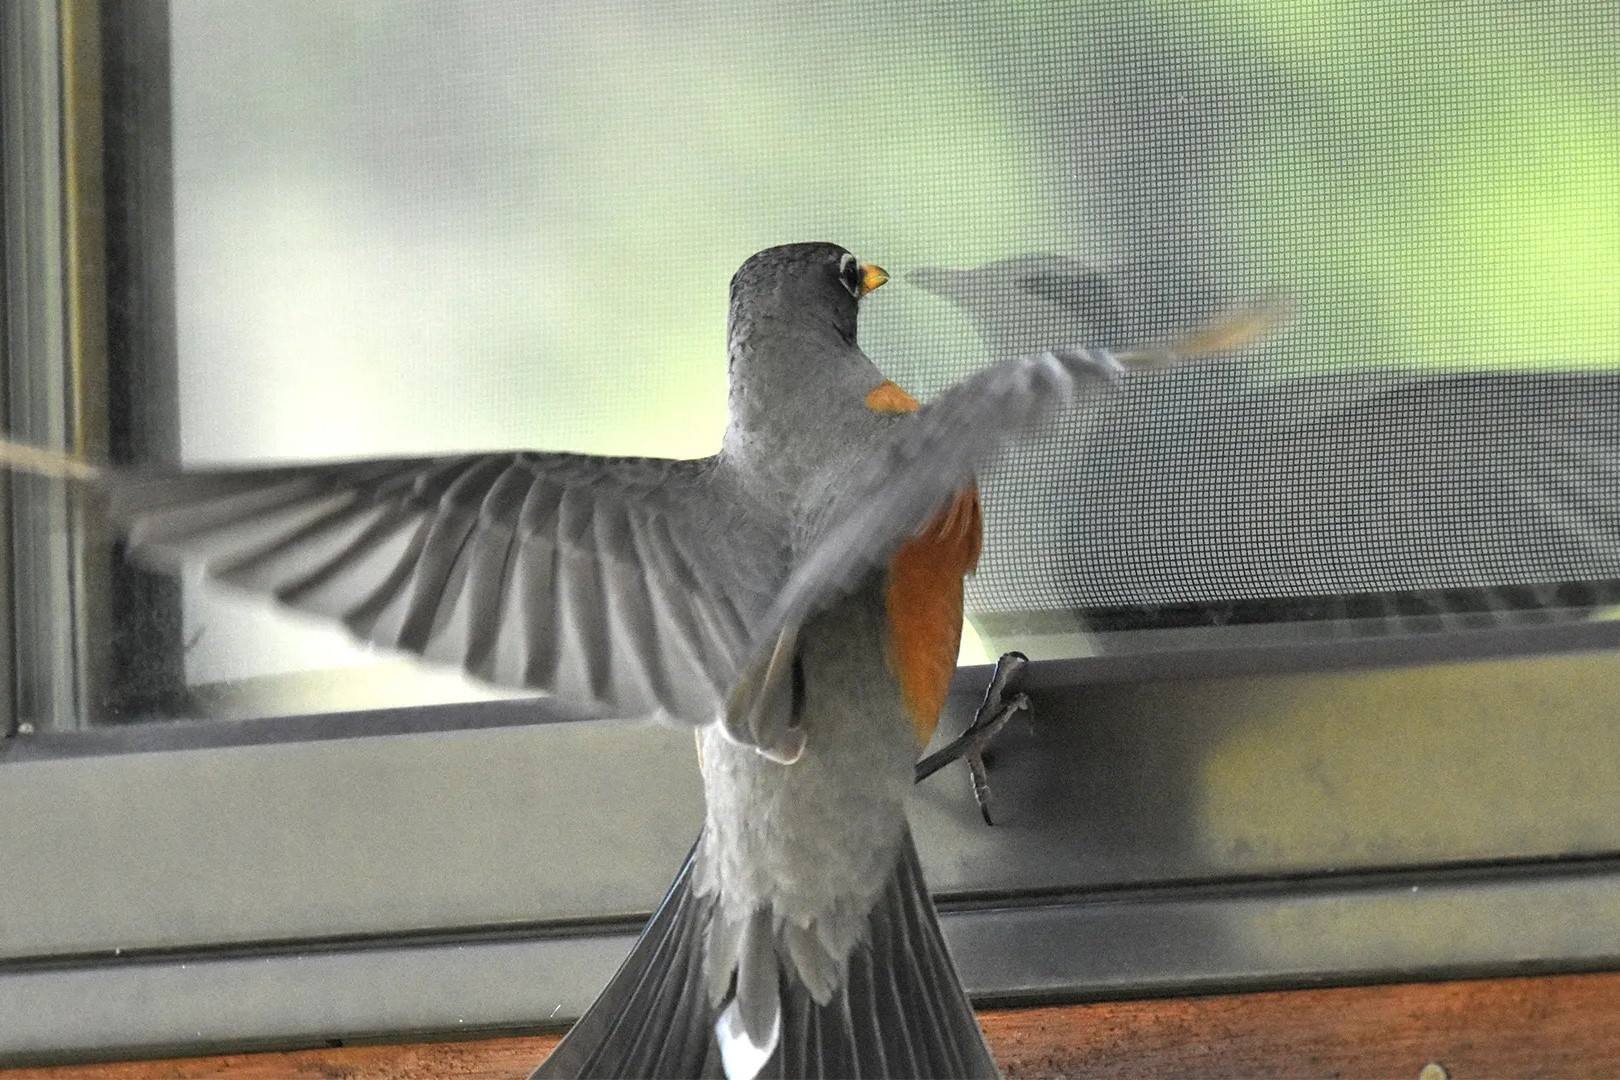 The Mysterious Significance Of A Bird's Persistent Window Assault